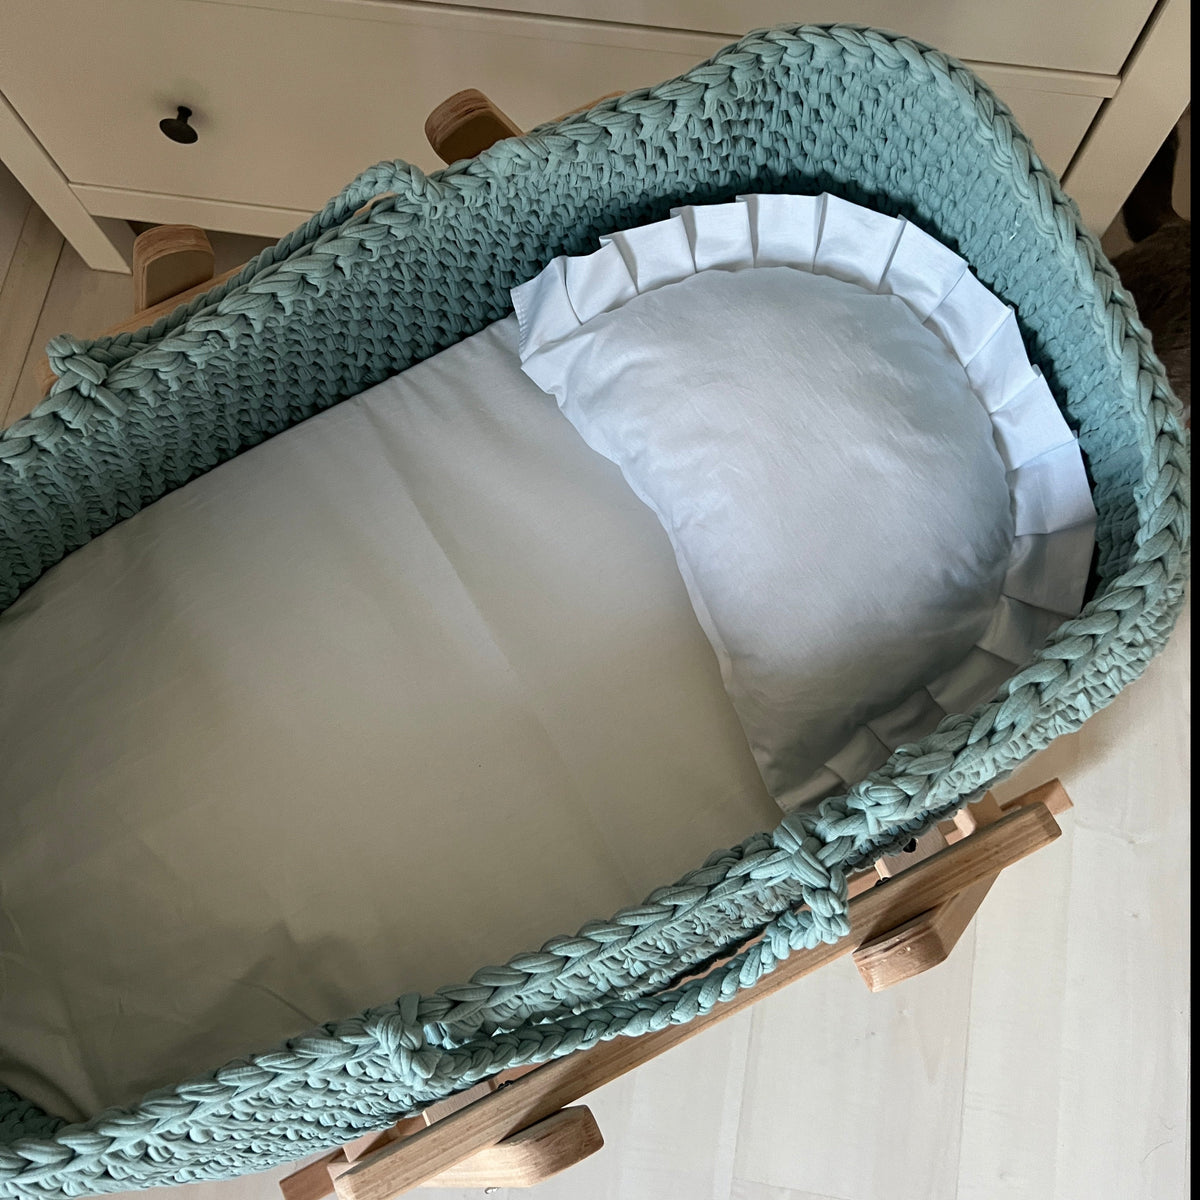 Angel Hand-Knitted Baby Bassinet - Steel Blue